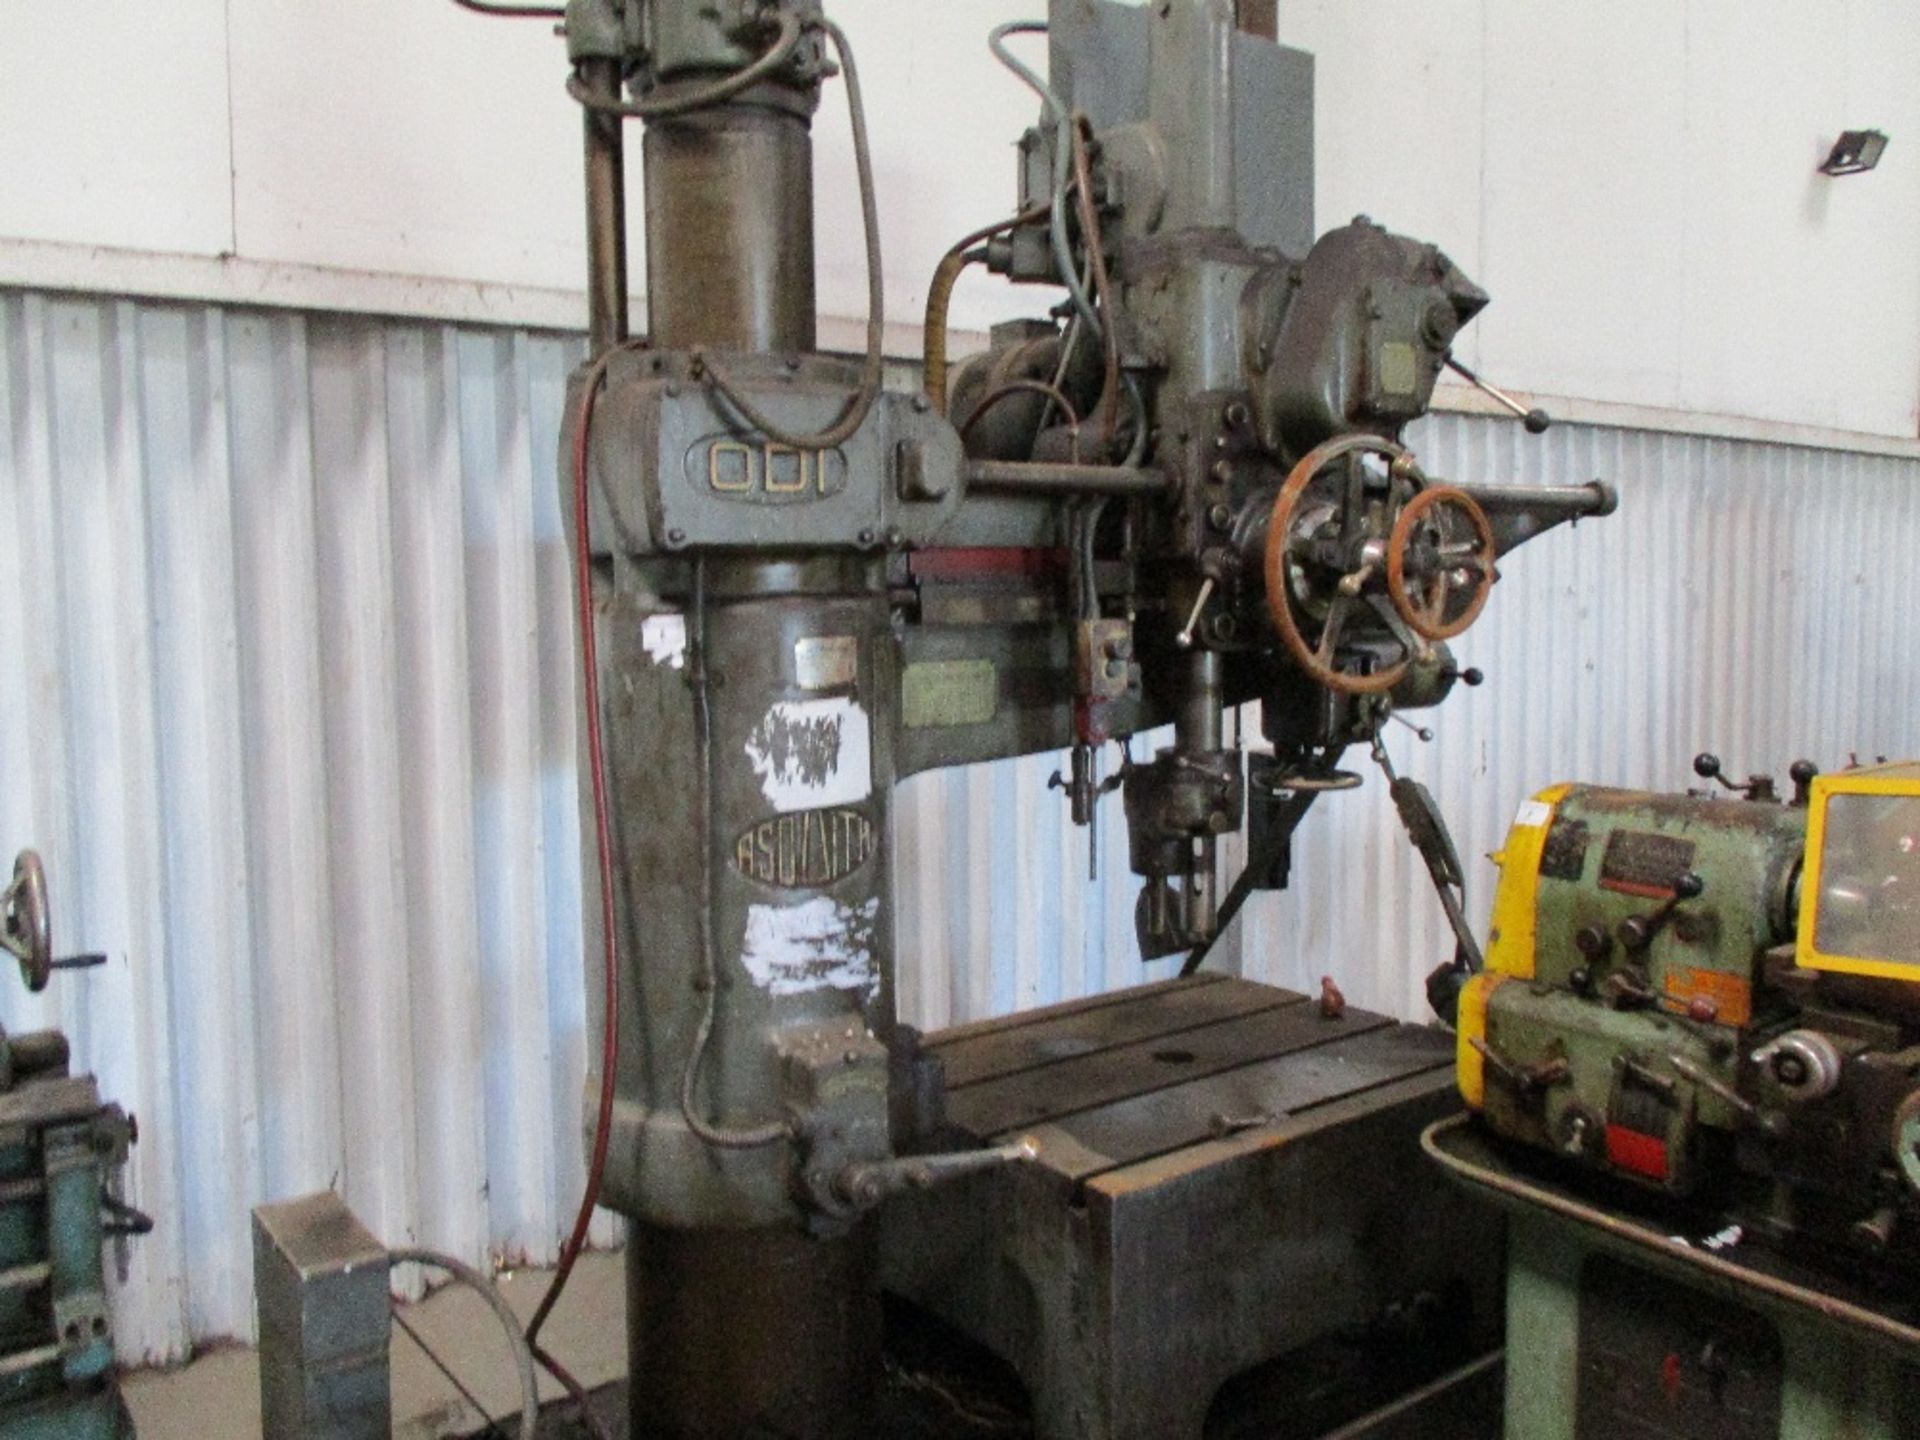 ASQUITH LARGE SIZED RADIAL DRILL, EX COMPANY LIQUIDATION